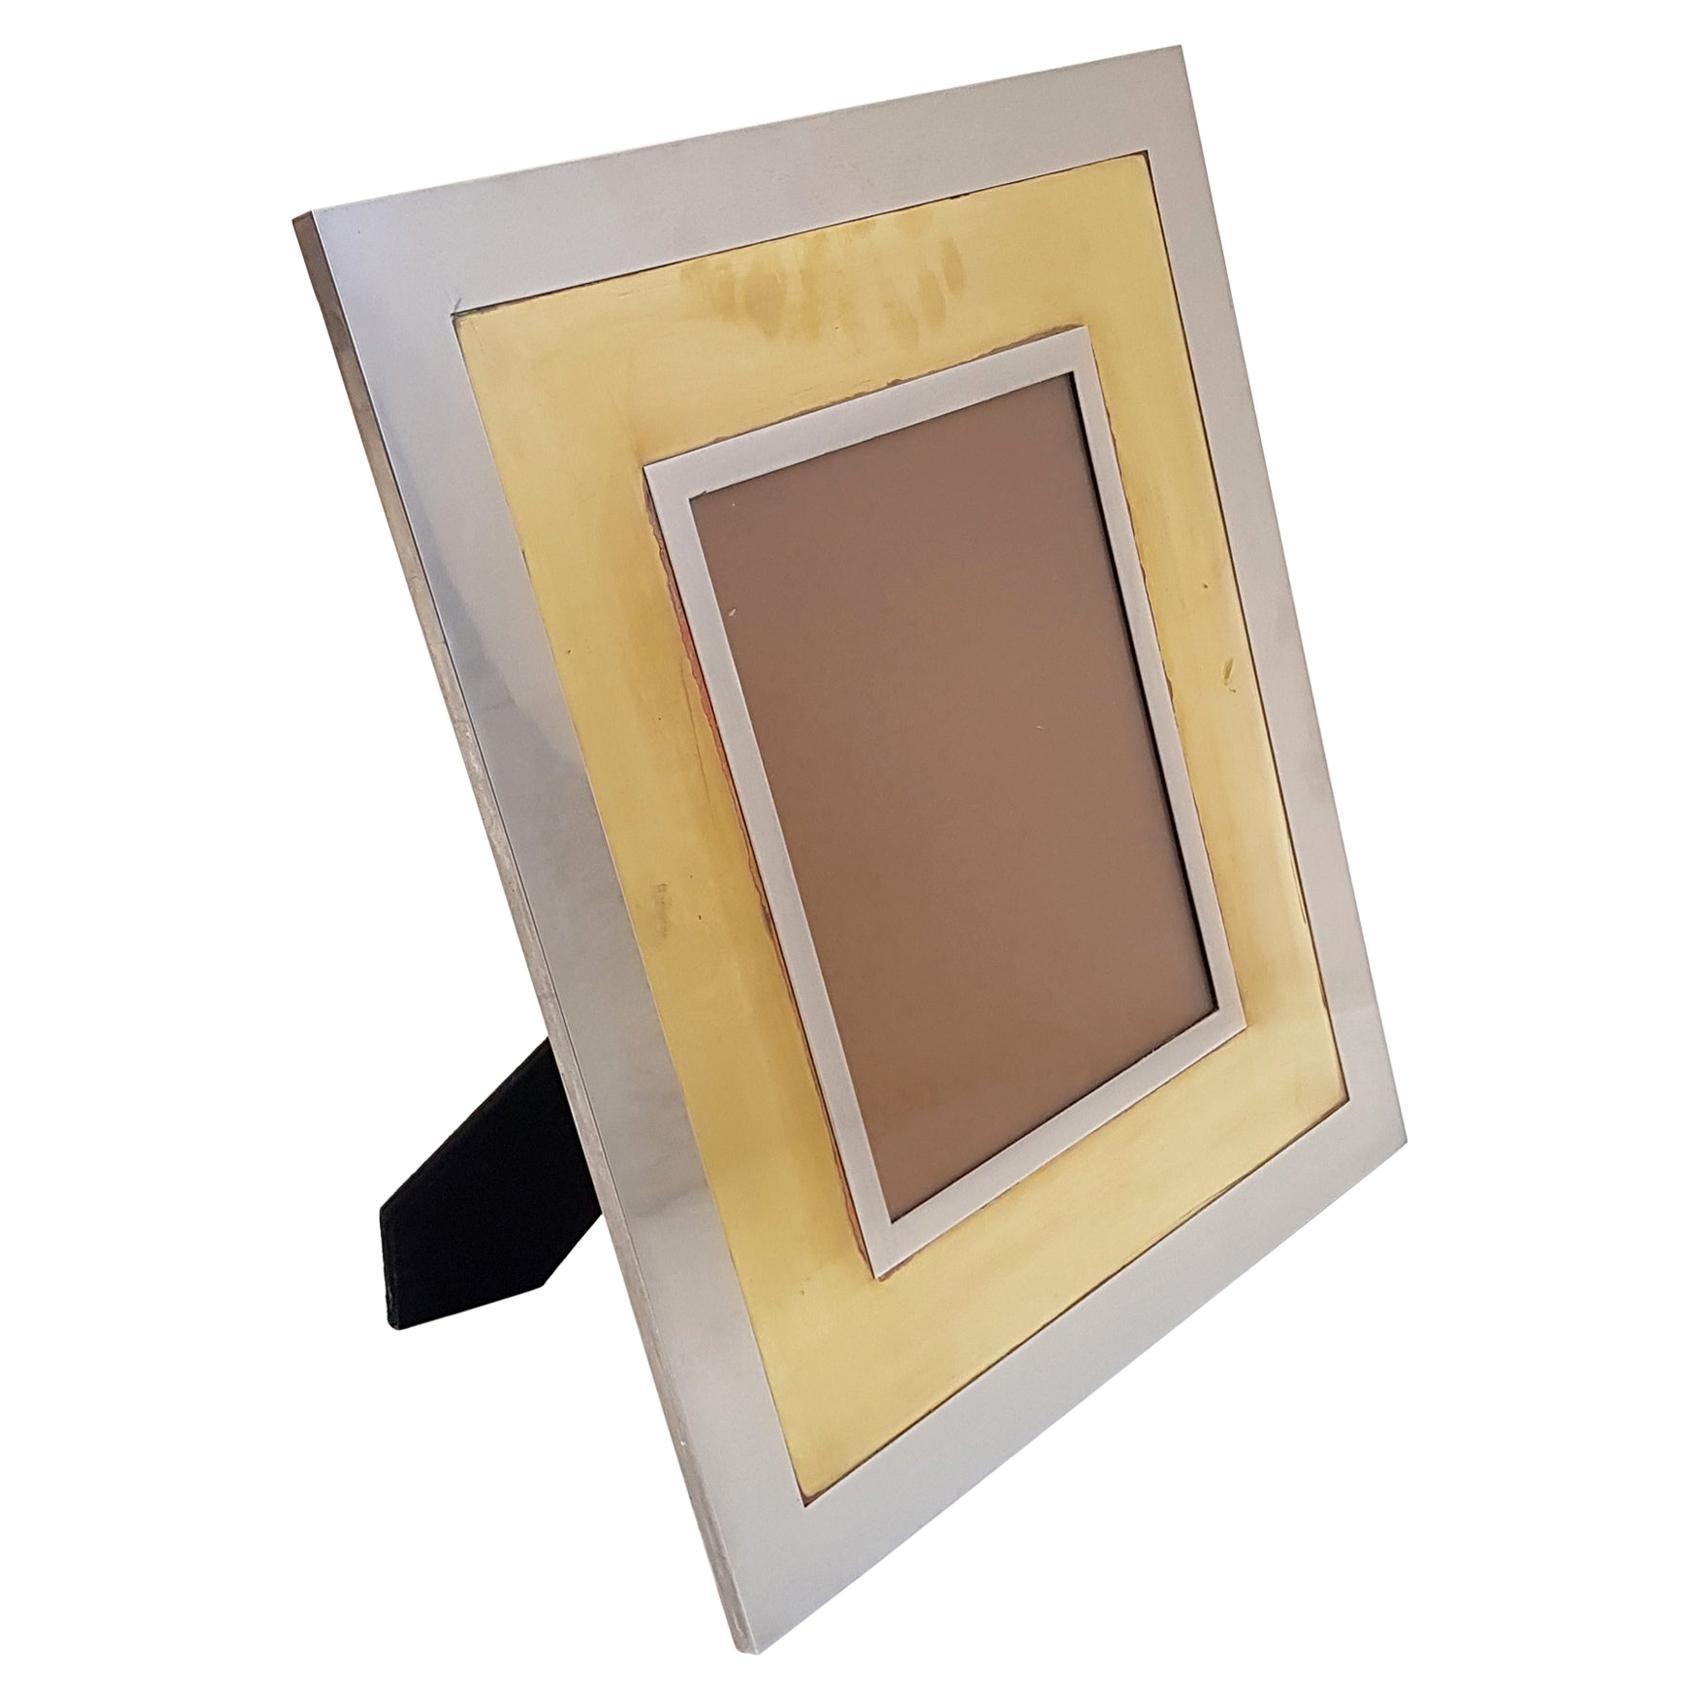 A large Italian photo frame from the 1970s made in brass and steel made to be standing.